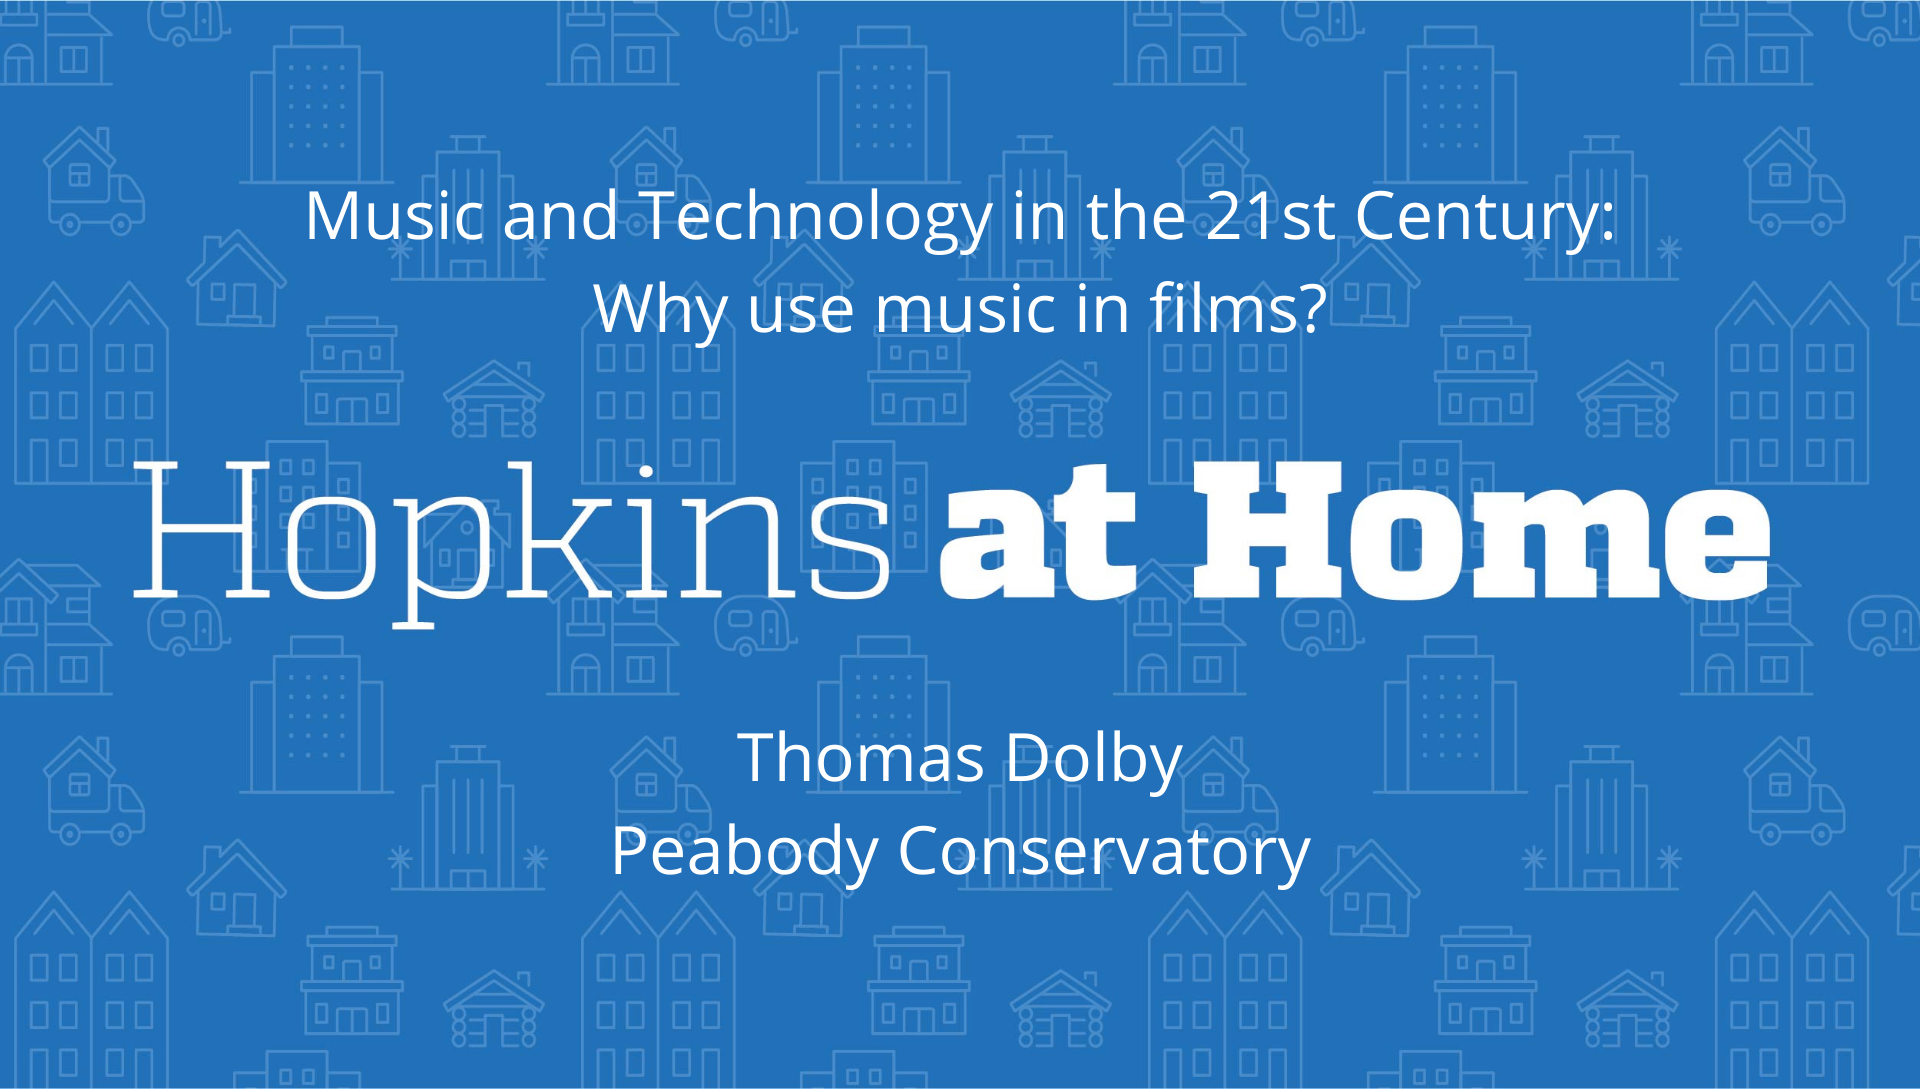 Music and Technology in the 21st Century: Why use music in films?